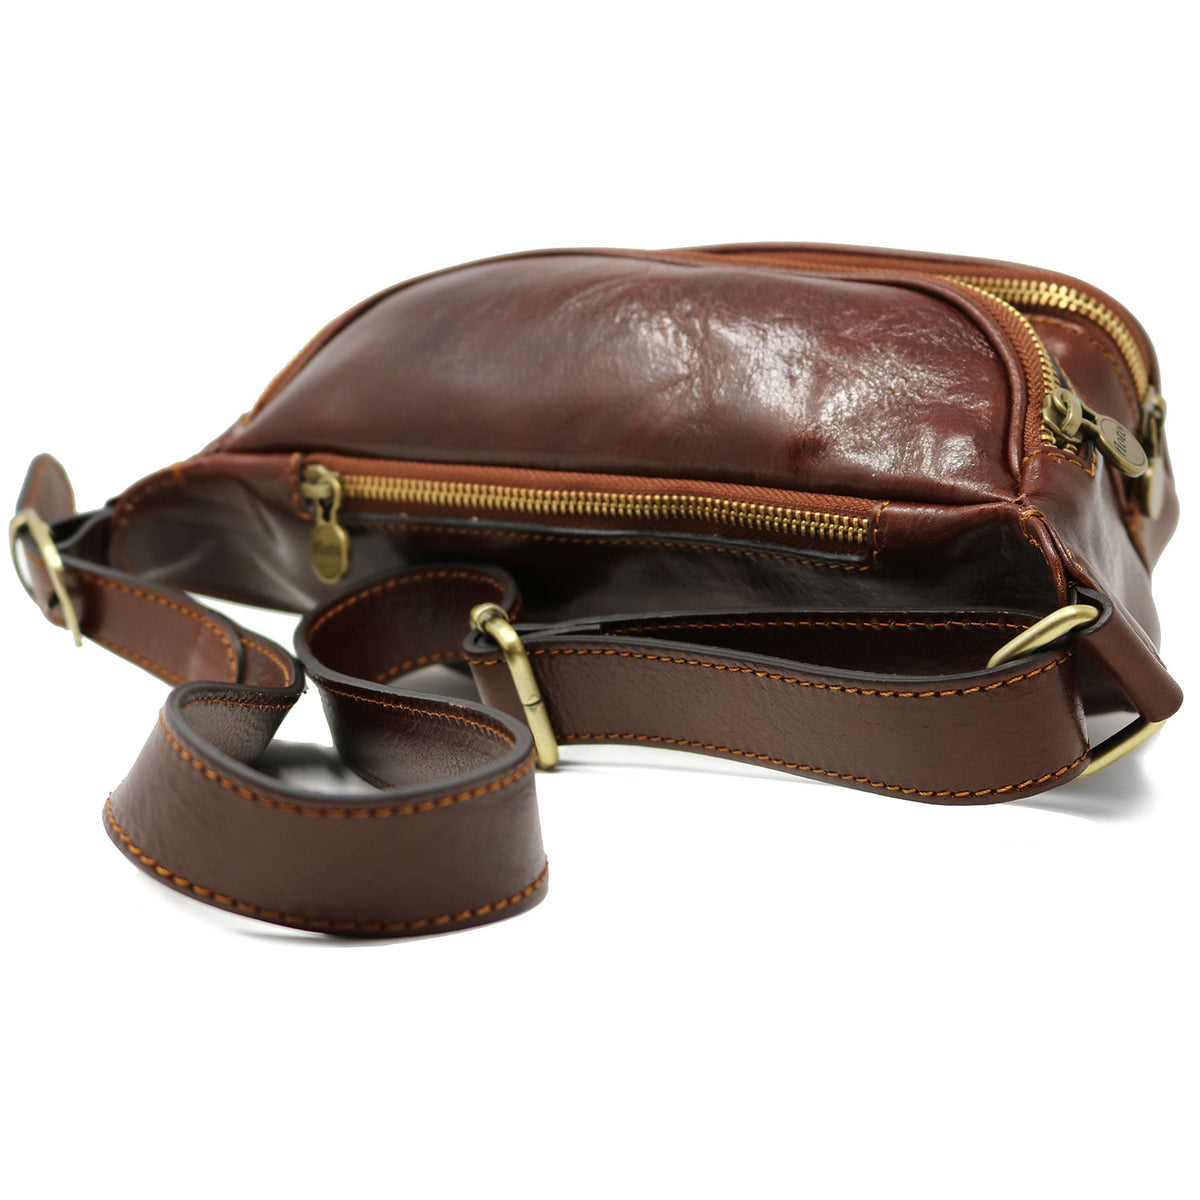 Outdoor calfskin leather fanny pack by Florence Leather Market